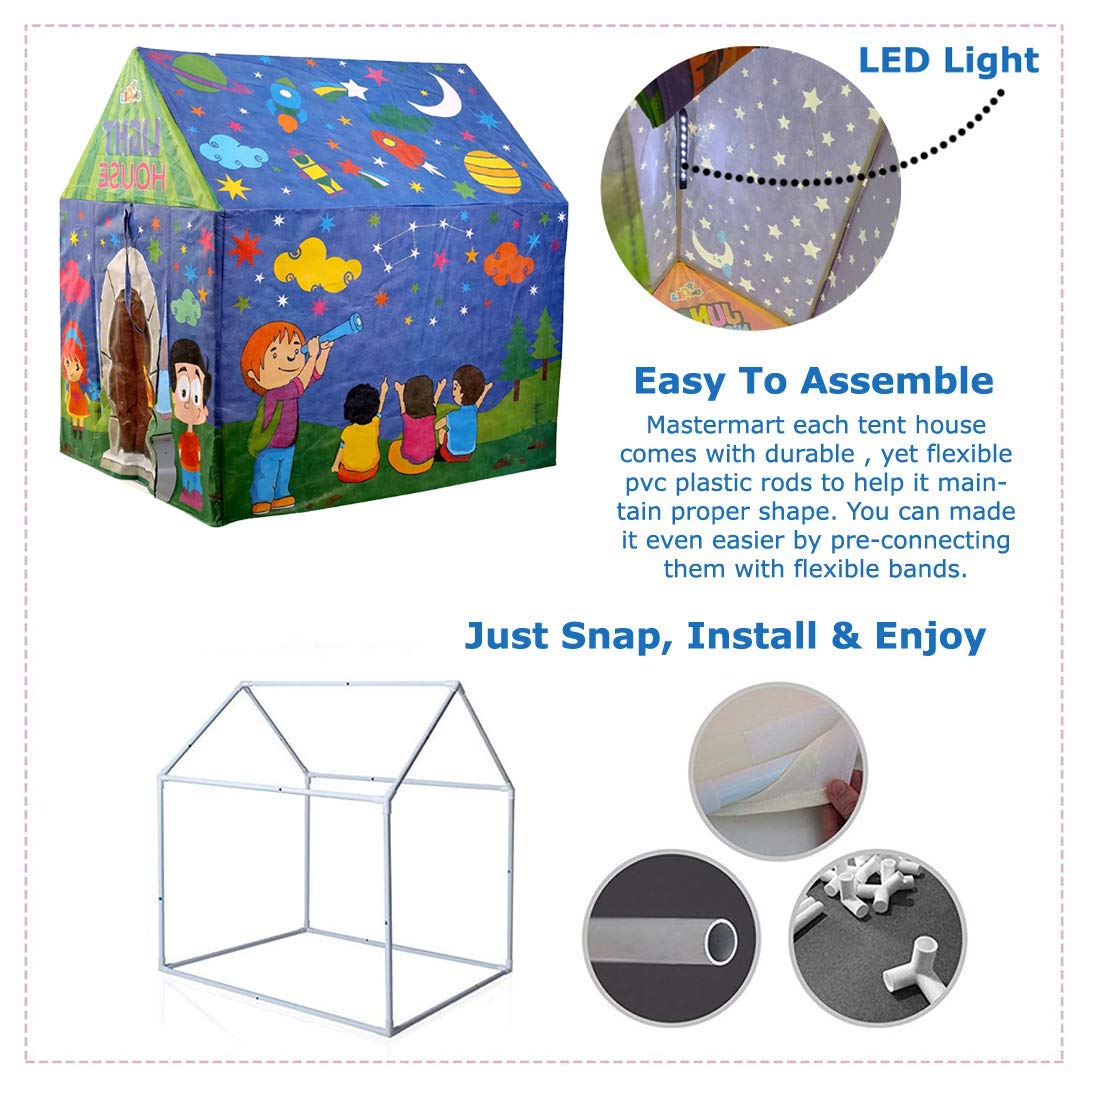 Awlas Play Tent House With LED Lights For Kids Indoor And Outdoor Play Toys - Multicolor